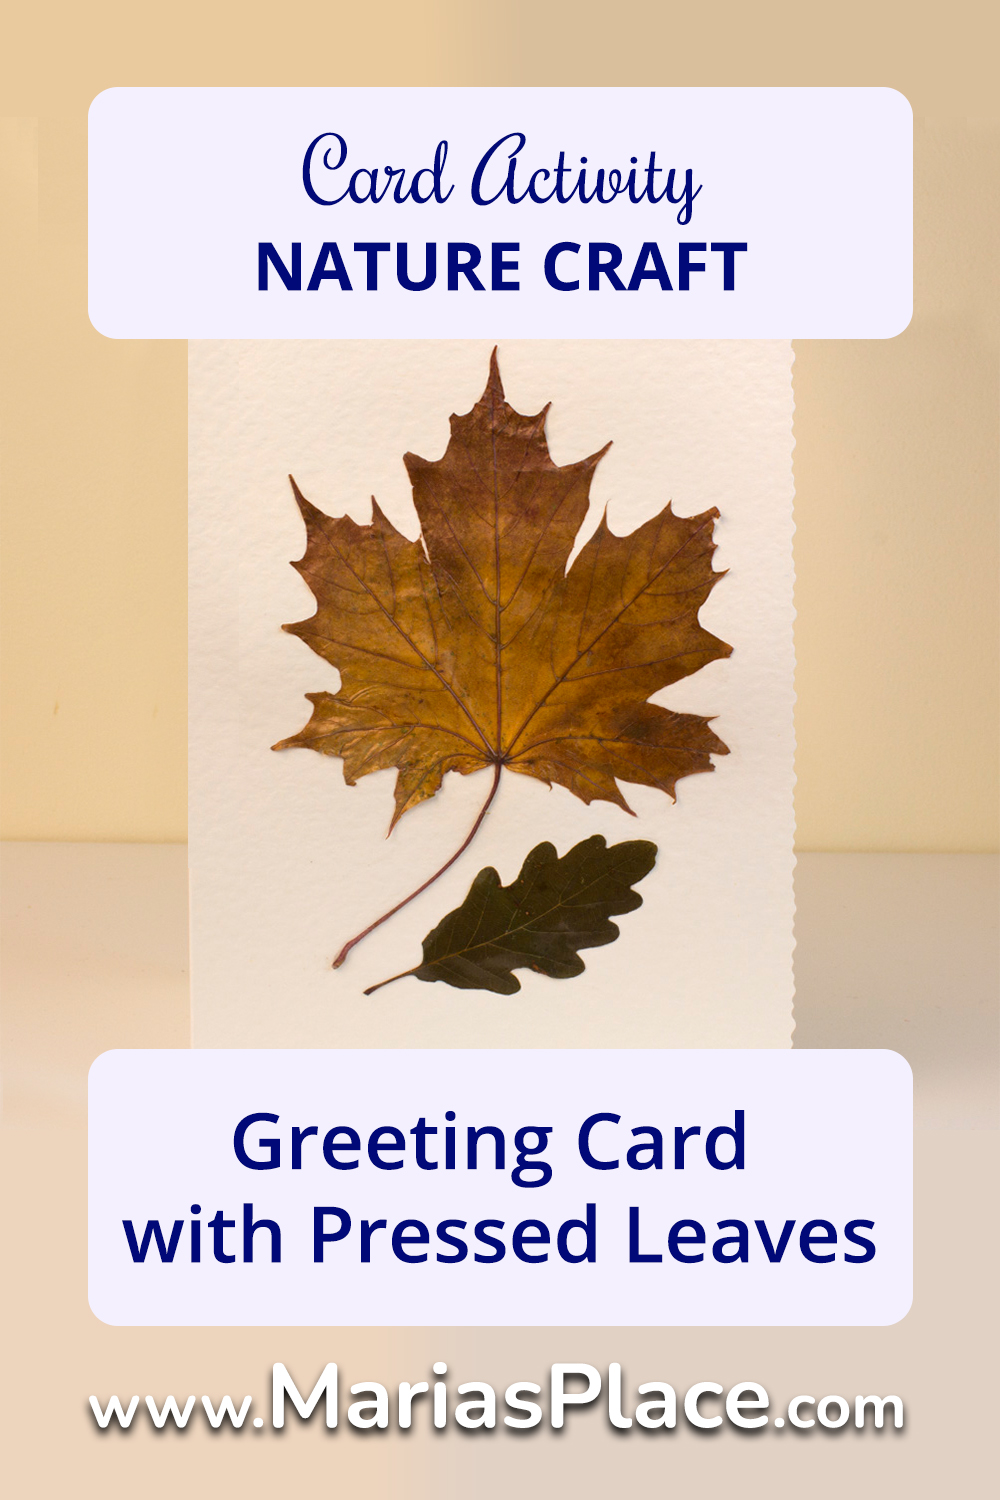 Greeting Cards with Pressed Leaves